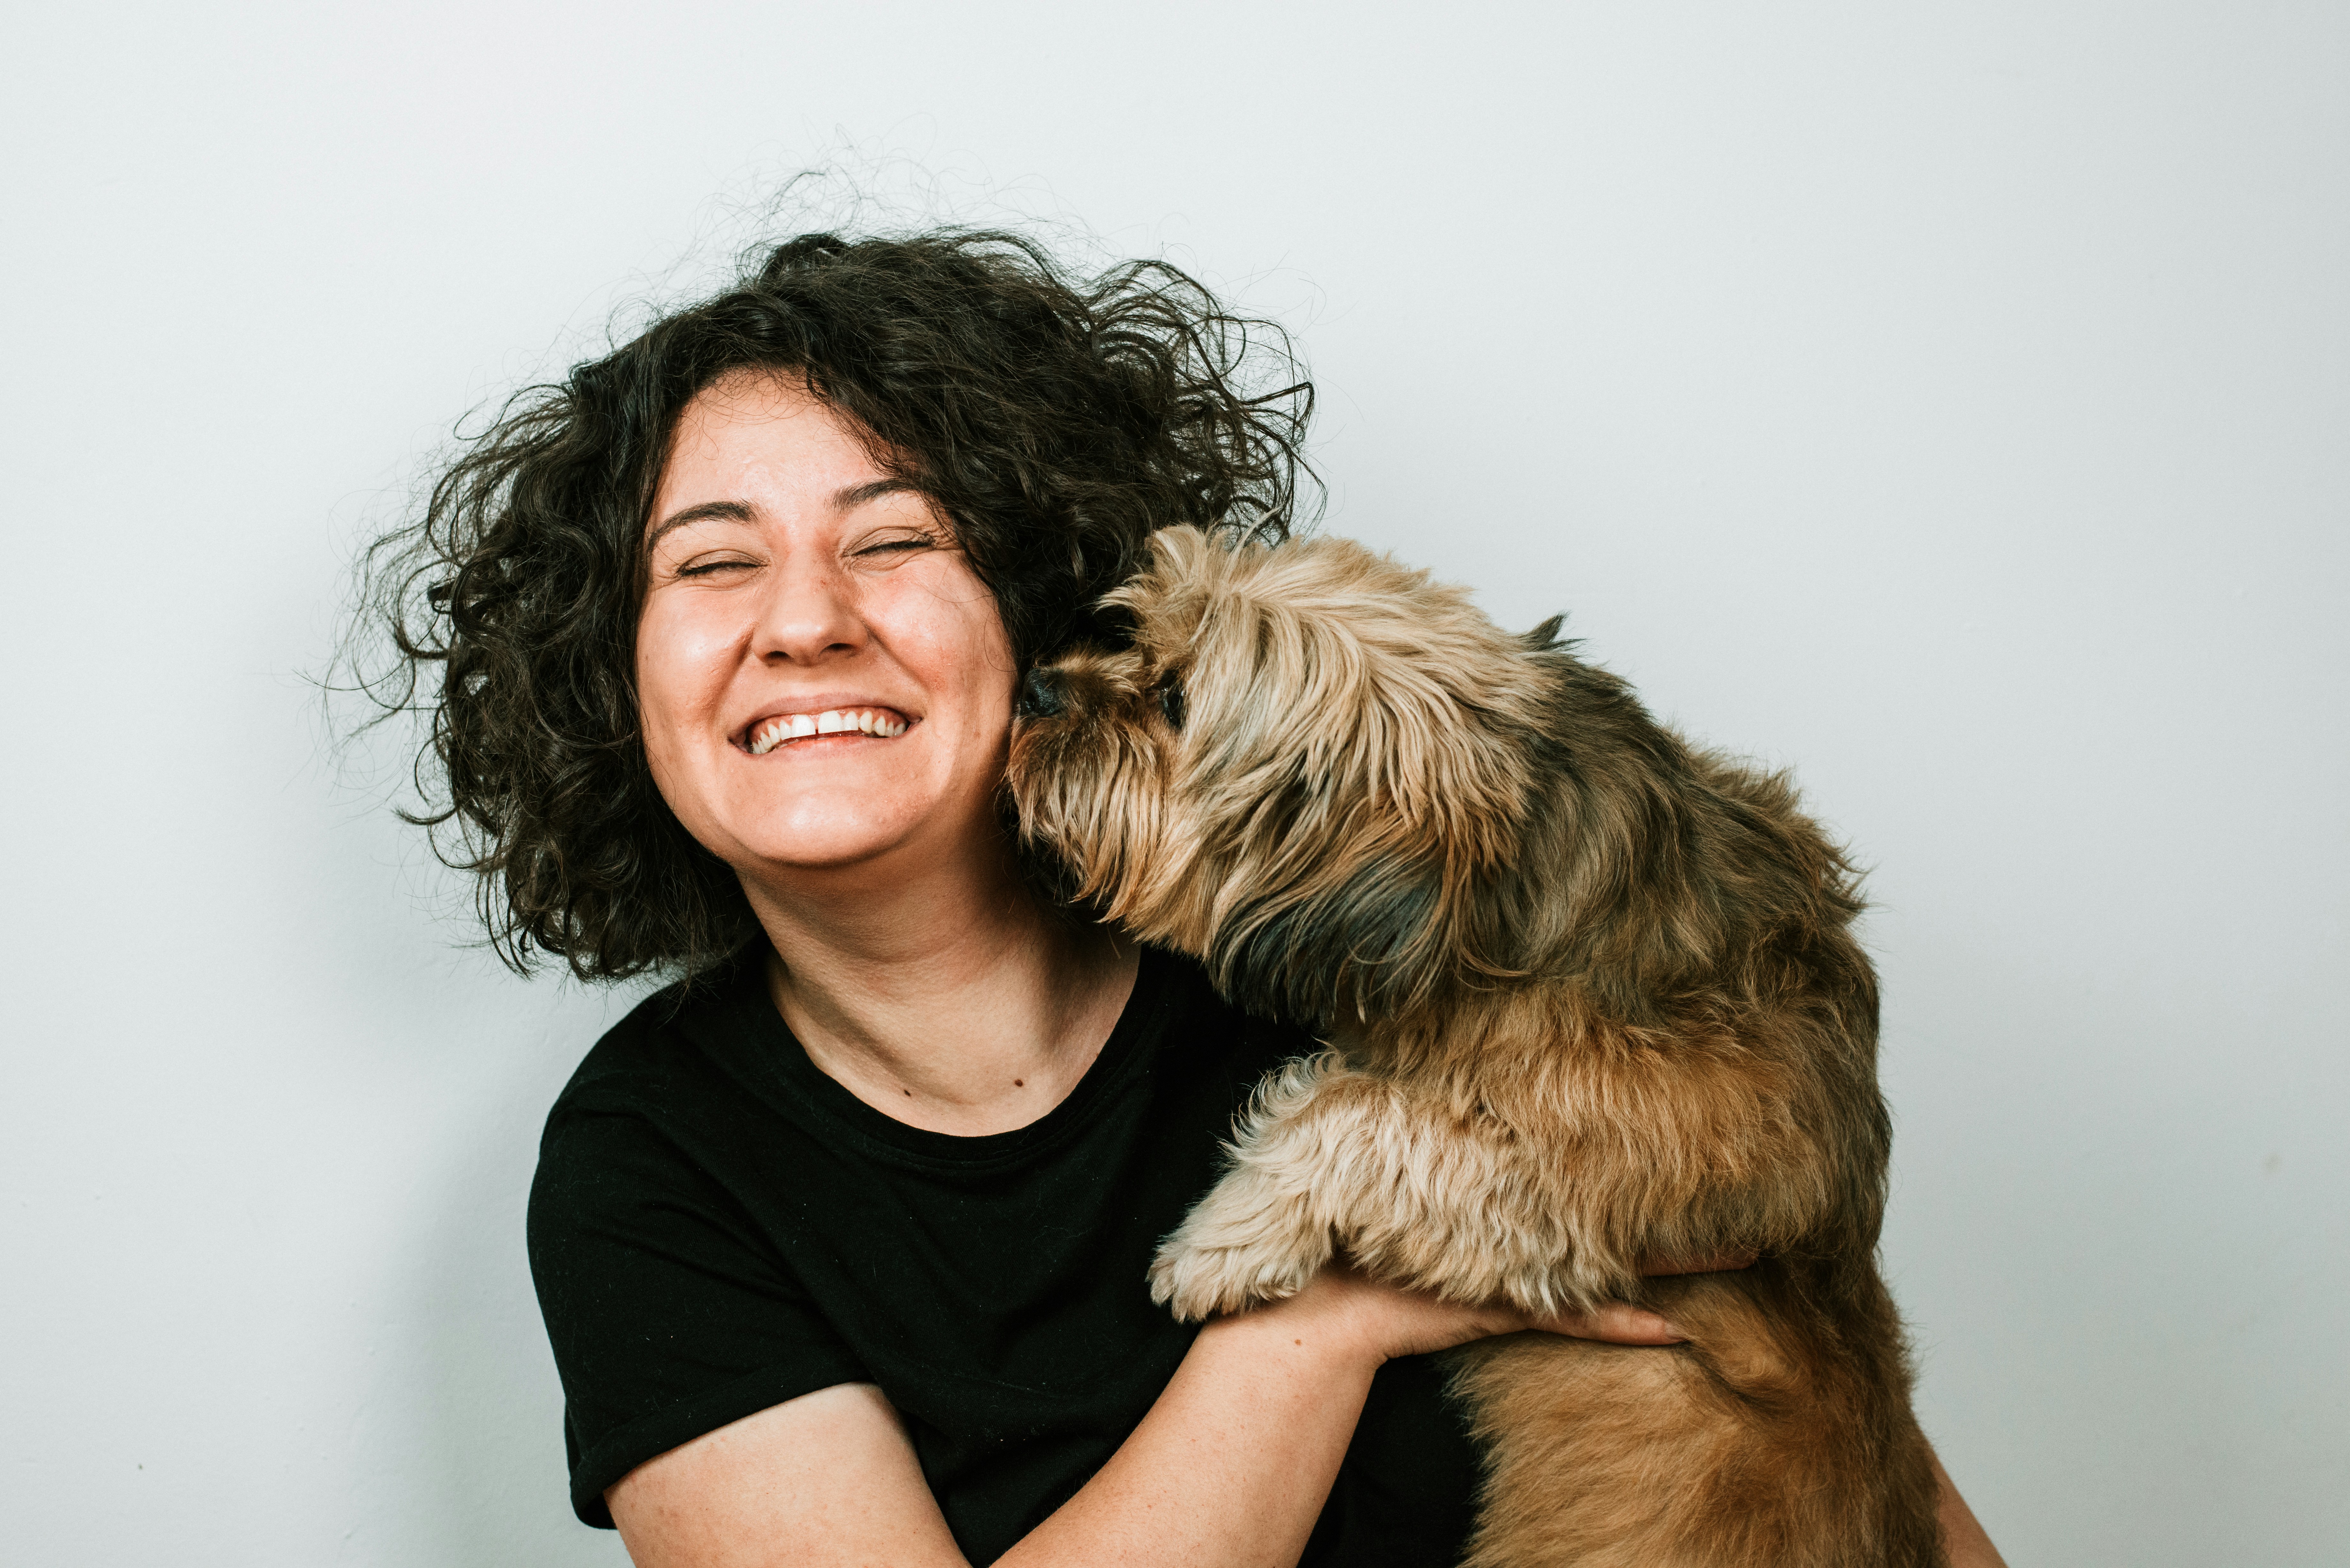 Girl laughing with dog